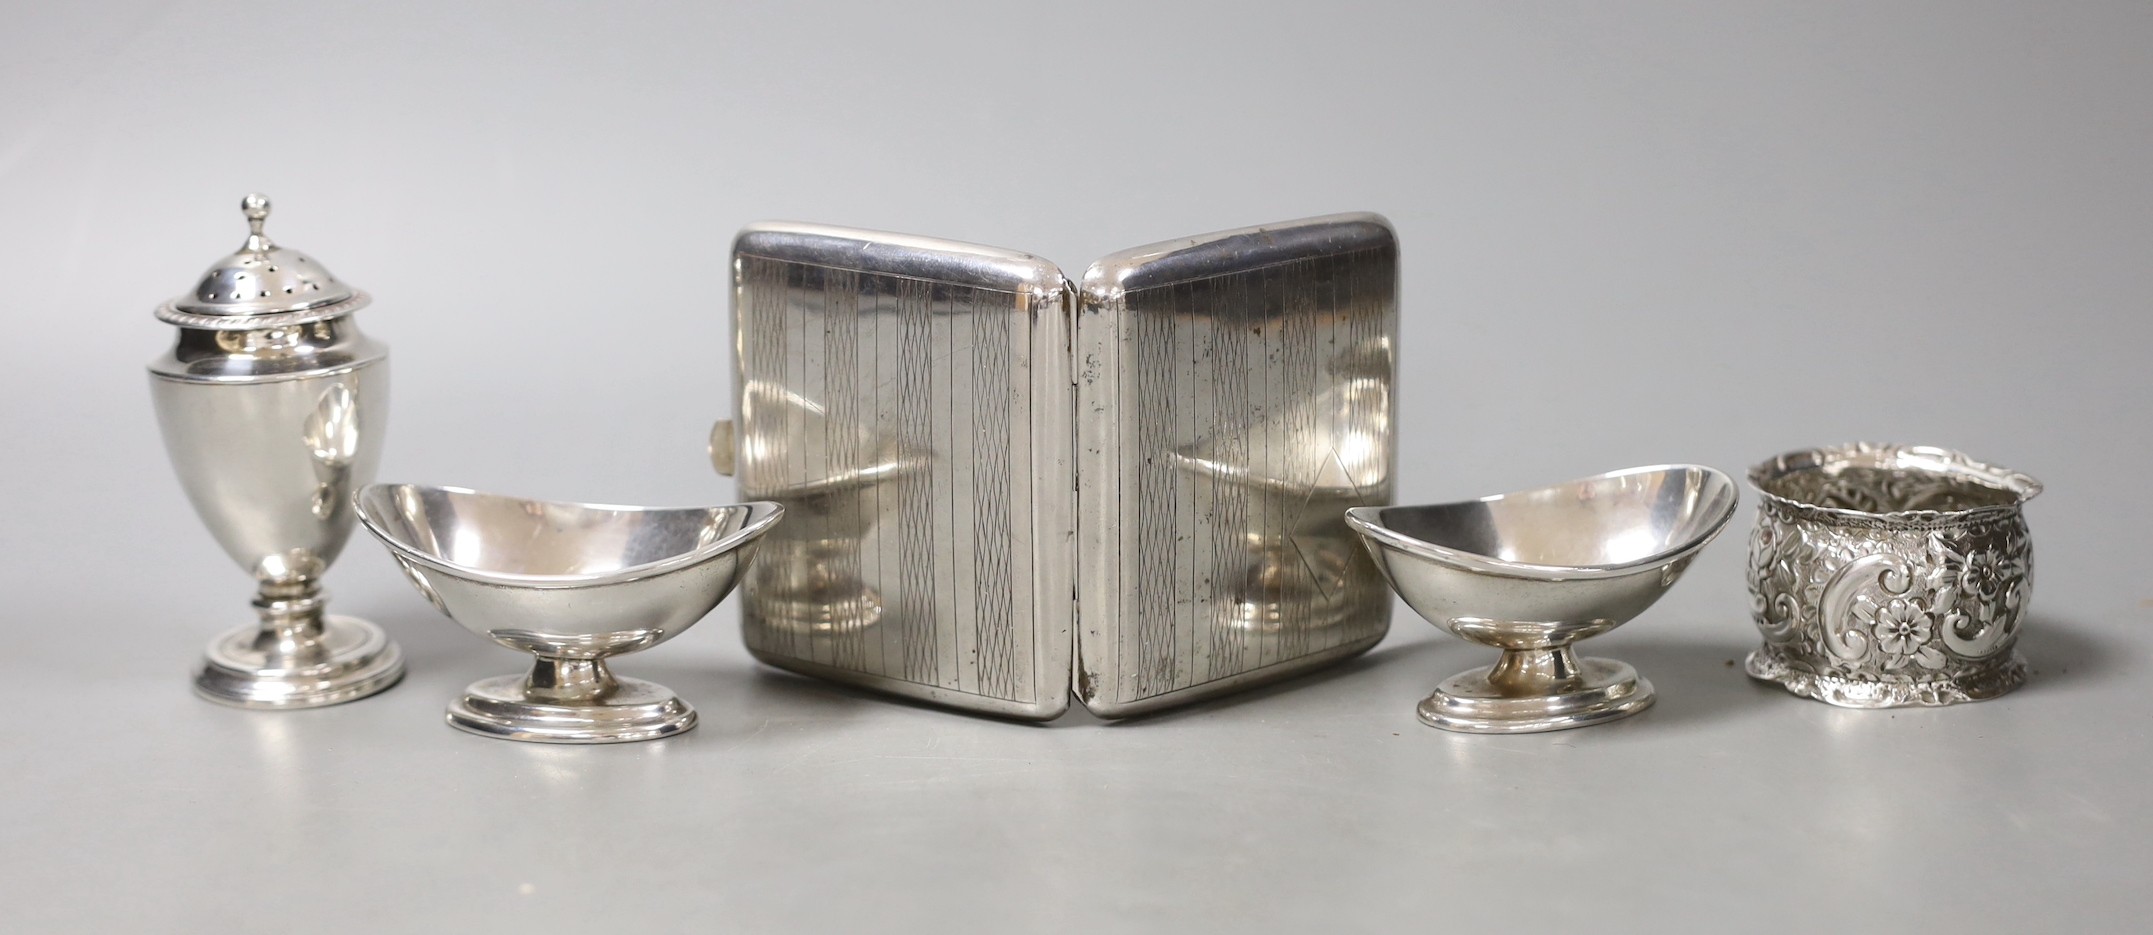 A white metal cigarette case and small silver including a pair of salts, condiment and napkin ring.